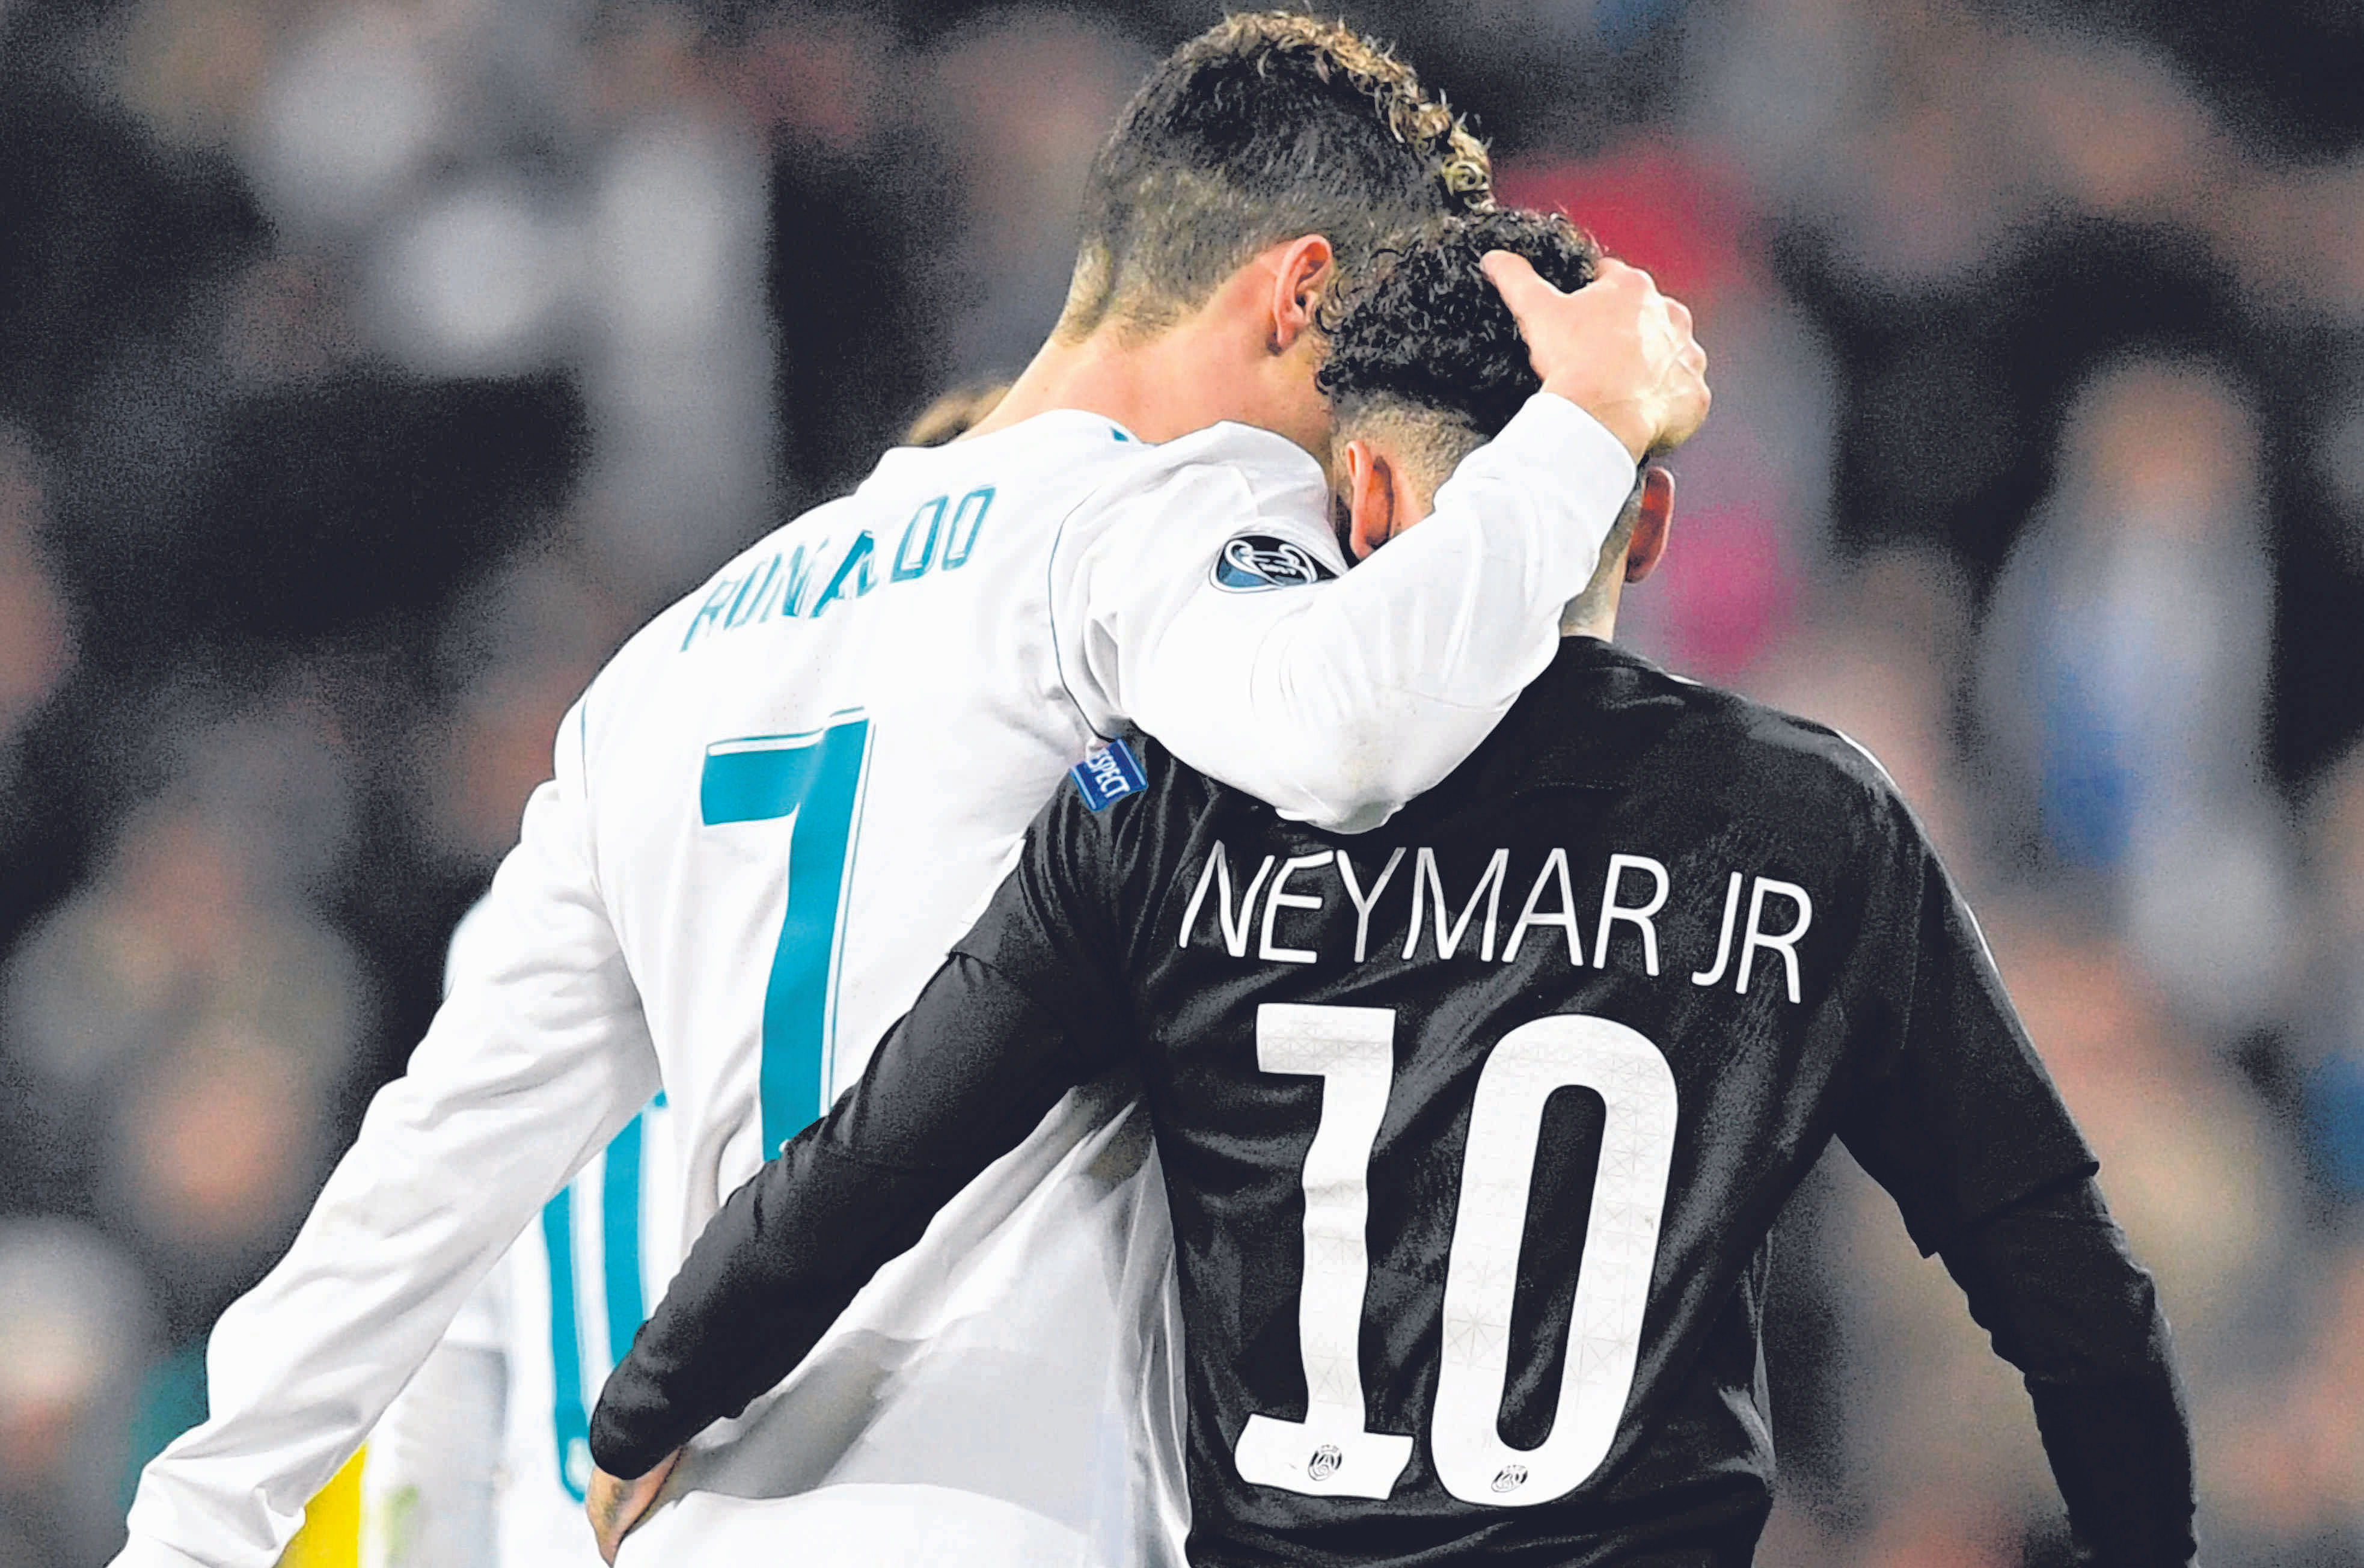 Real Madrid’s Cristiano Ronaldo and Paris Saint-Germain’s Neymar at half-time during the Champions League game on Wednesday. Real came from behind to win 3-1 and former Brazil striker Walter Casagrande said of Neymar: “He doesn’t have the quality of Messi